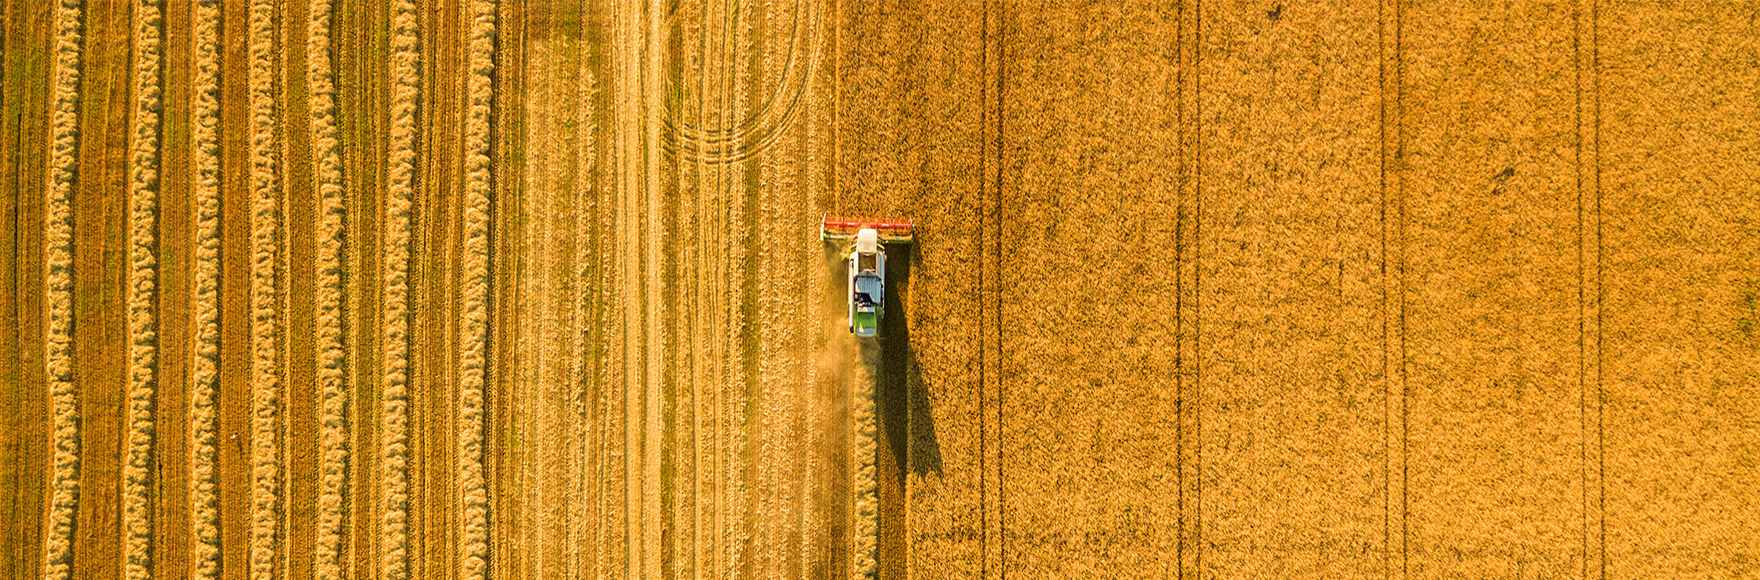 sky view of a combine harvesting wheat